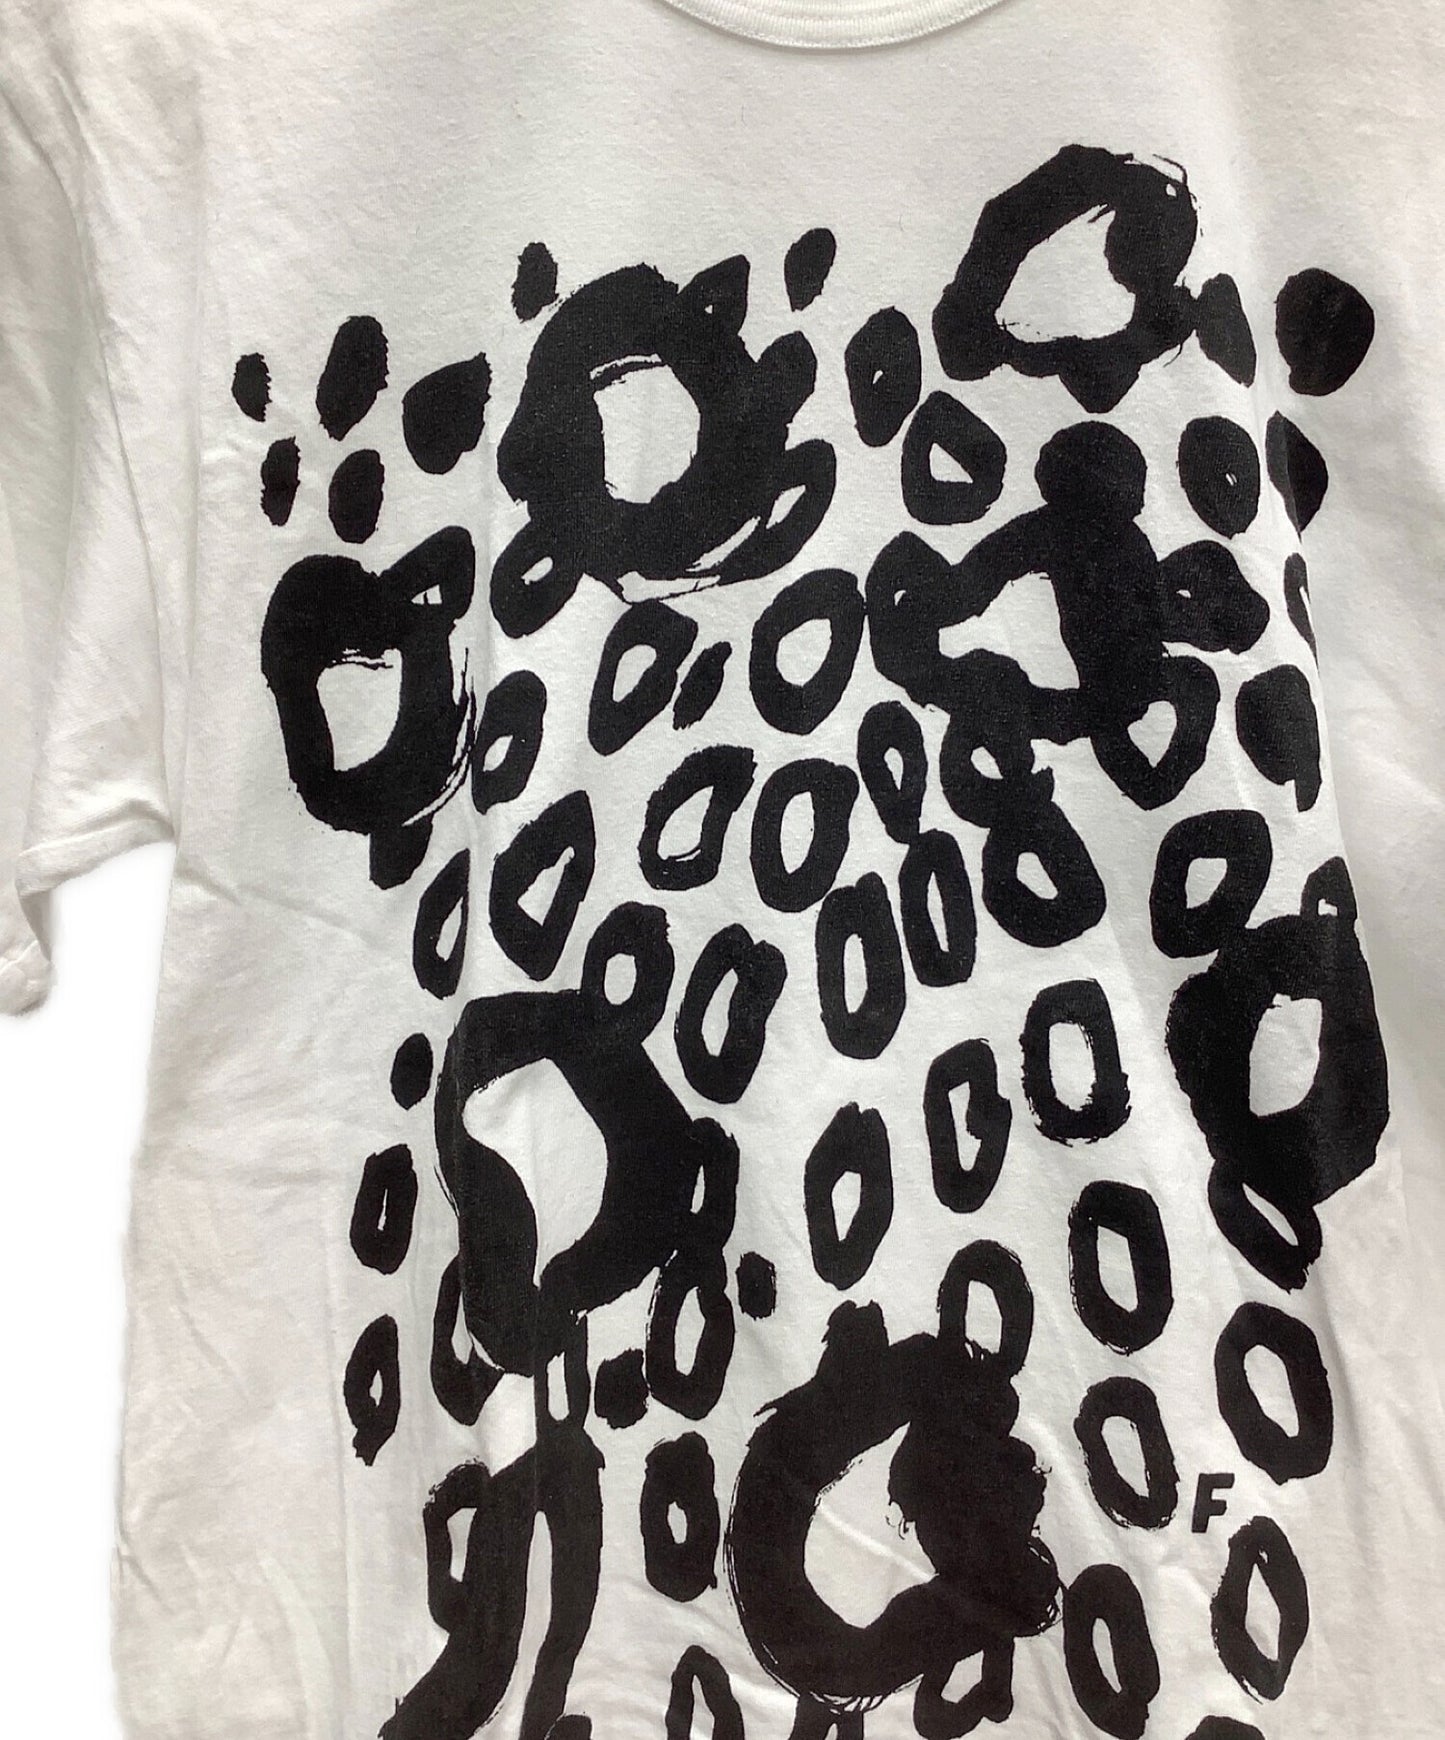 [Pre-owned] BLACK COMME des GARCONS printed cut-and-sew 1G-T003